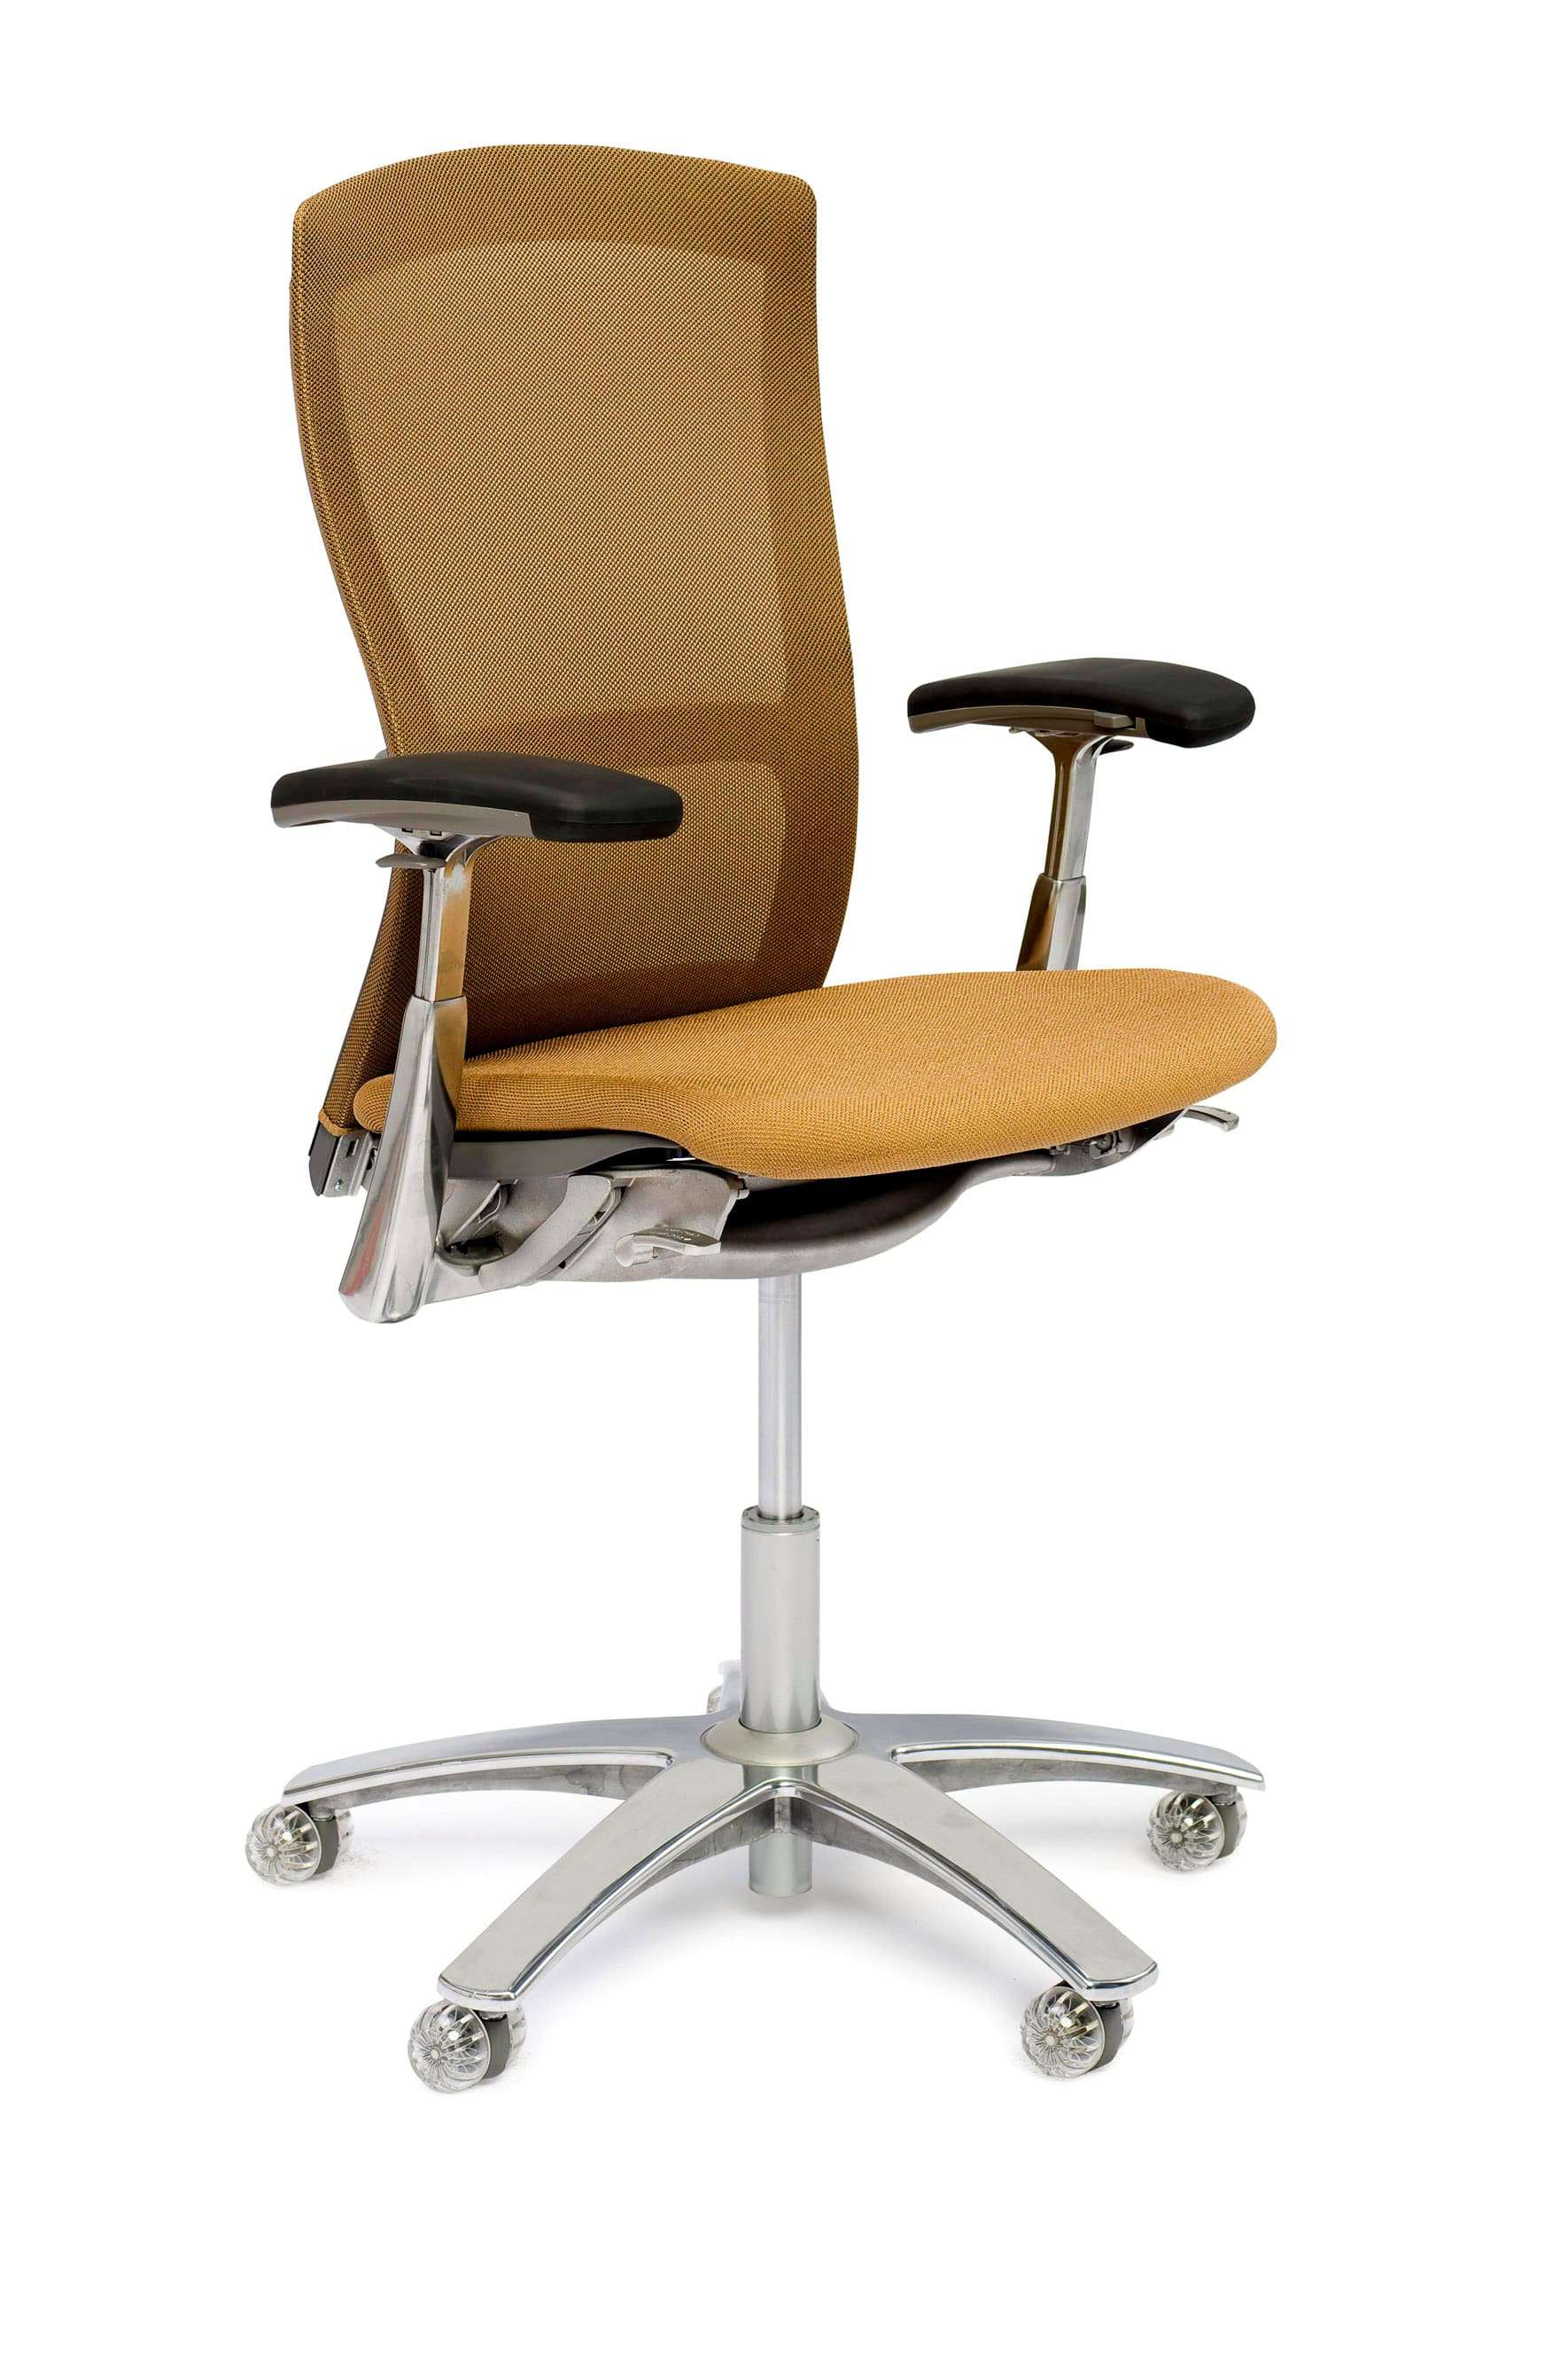 Choosing A Chair For Comfort And Adjustability